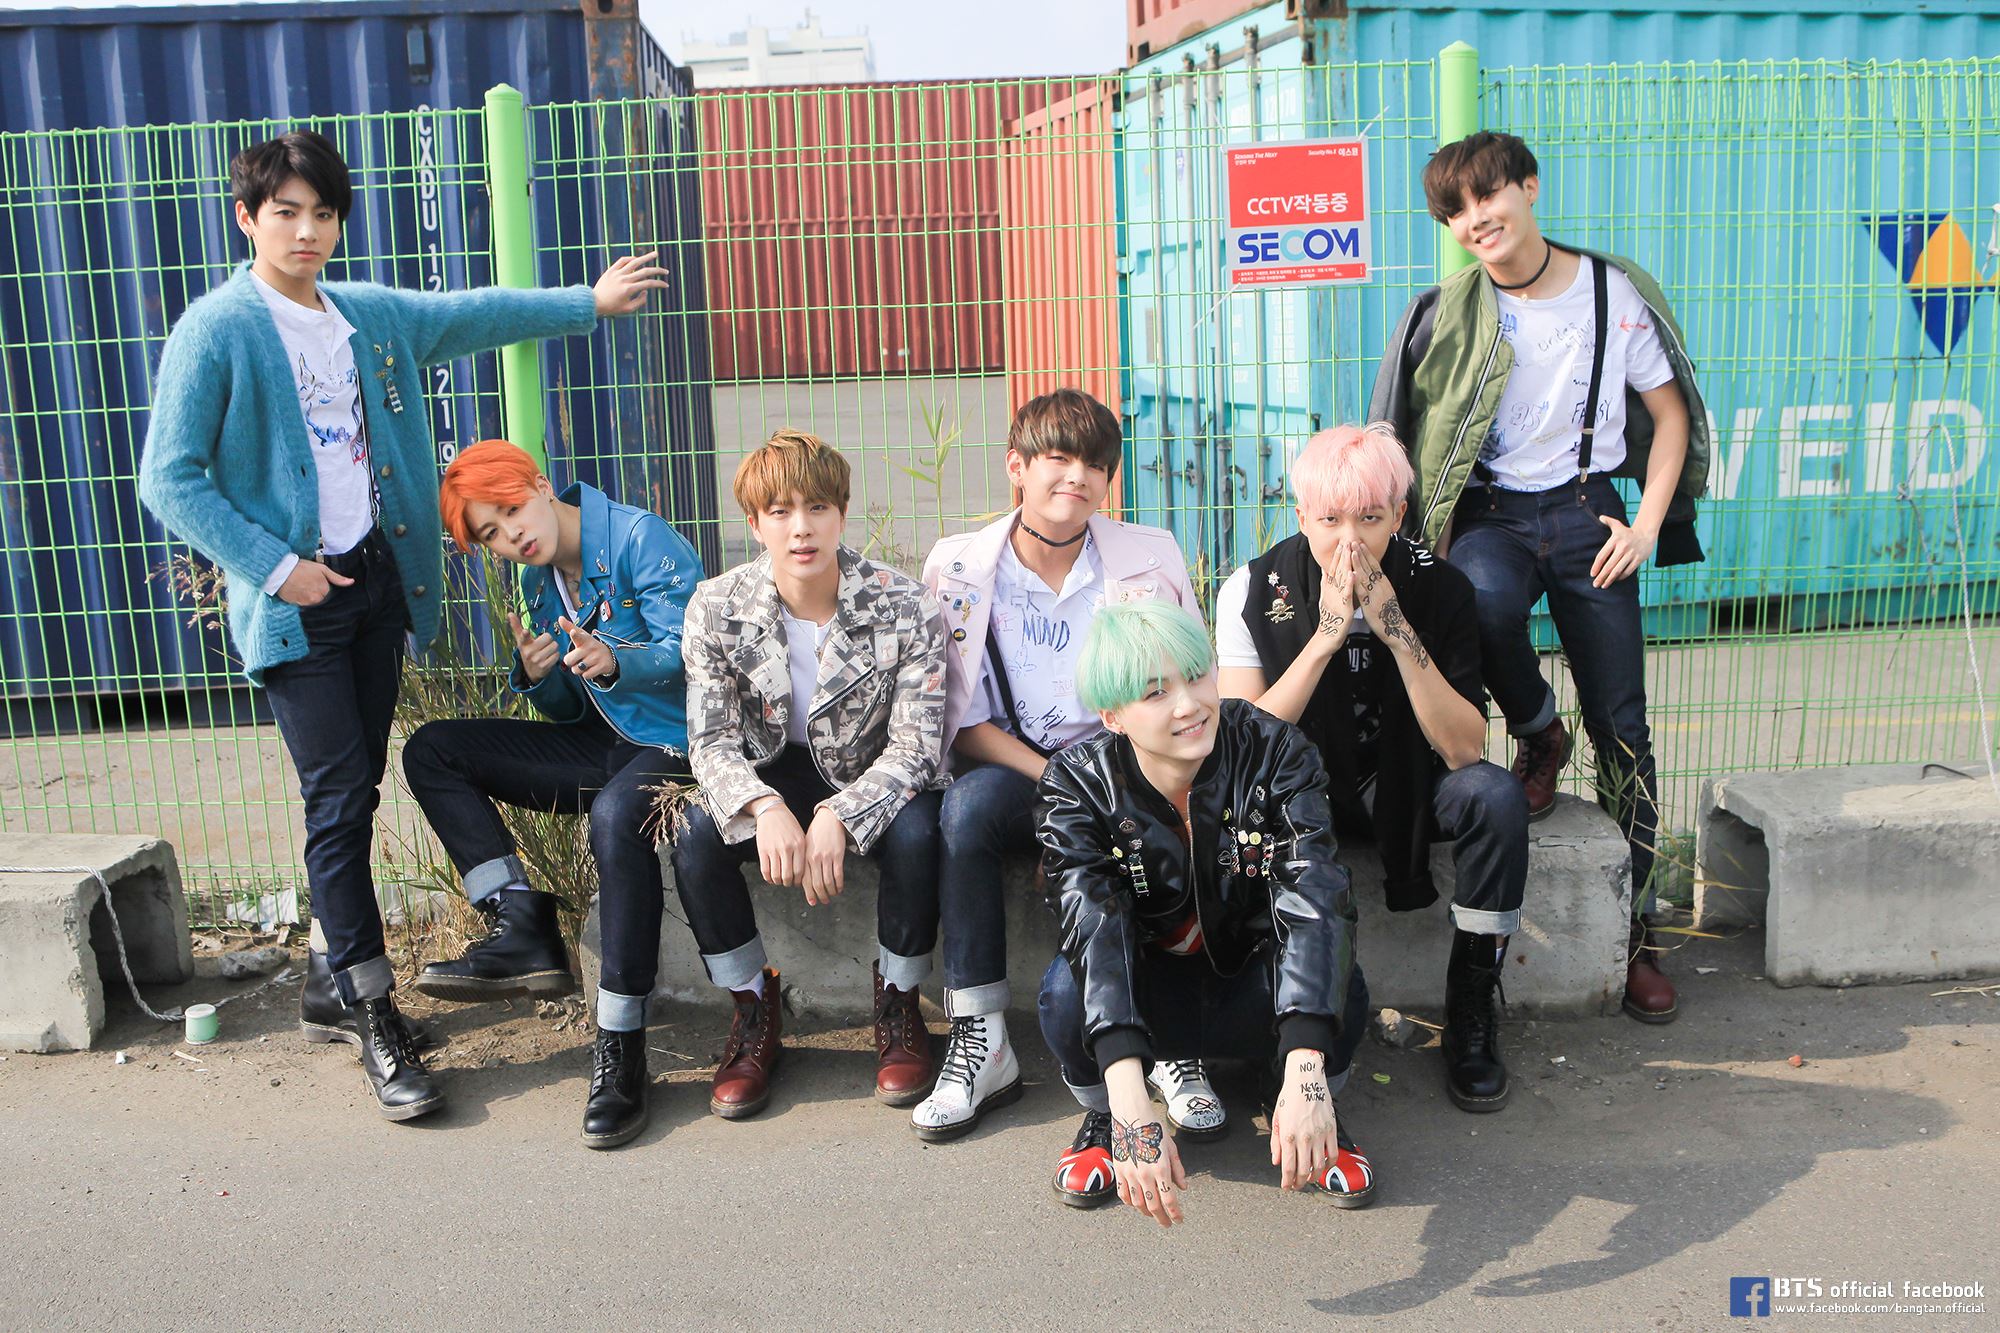 This Compilation of BTS Group Photos From Debut Until Now Will Make You